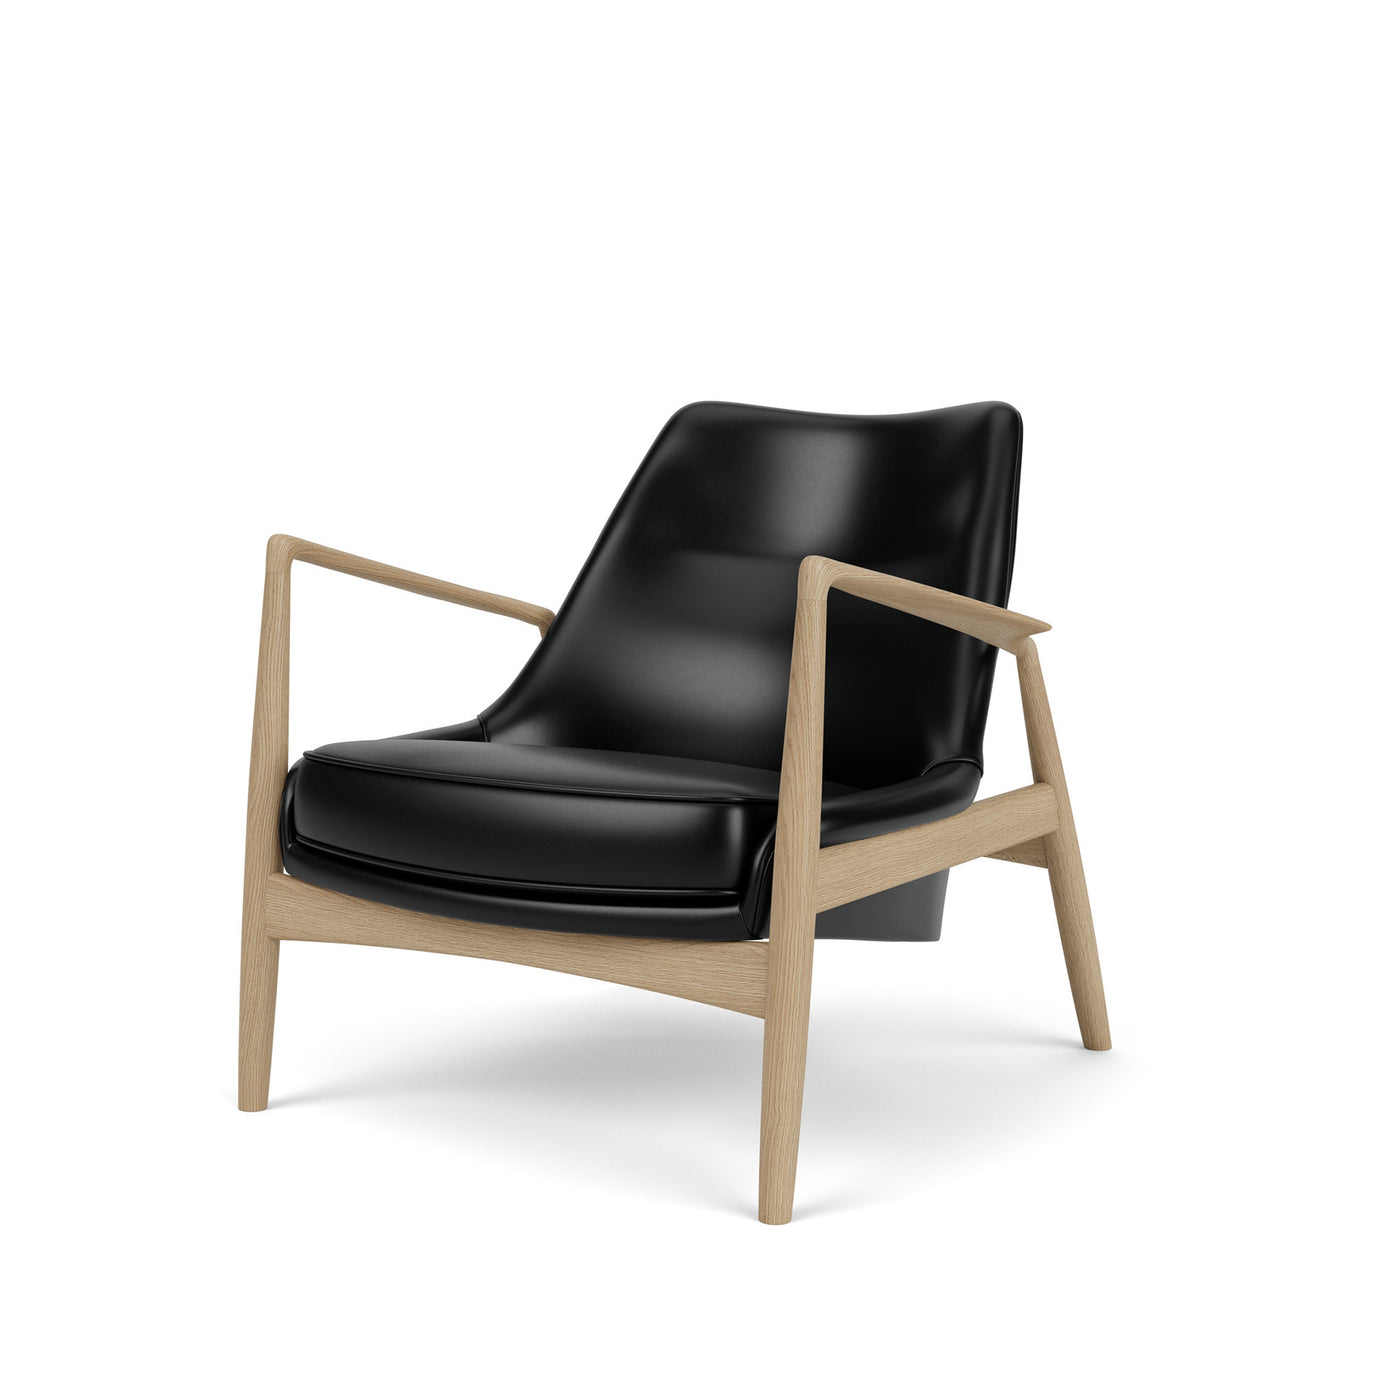 THE SEAL lounge chair